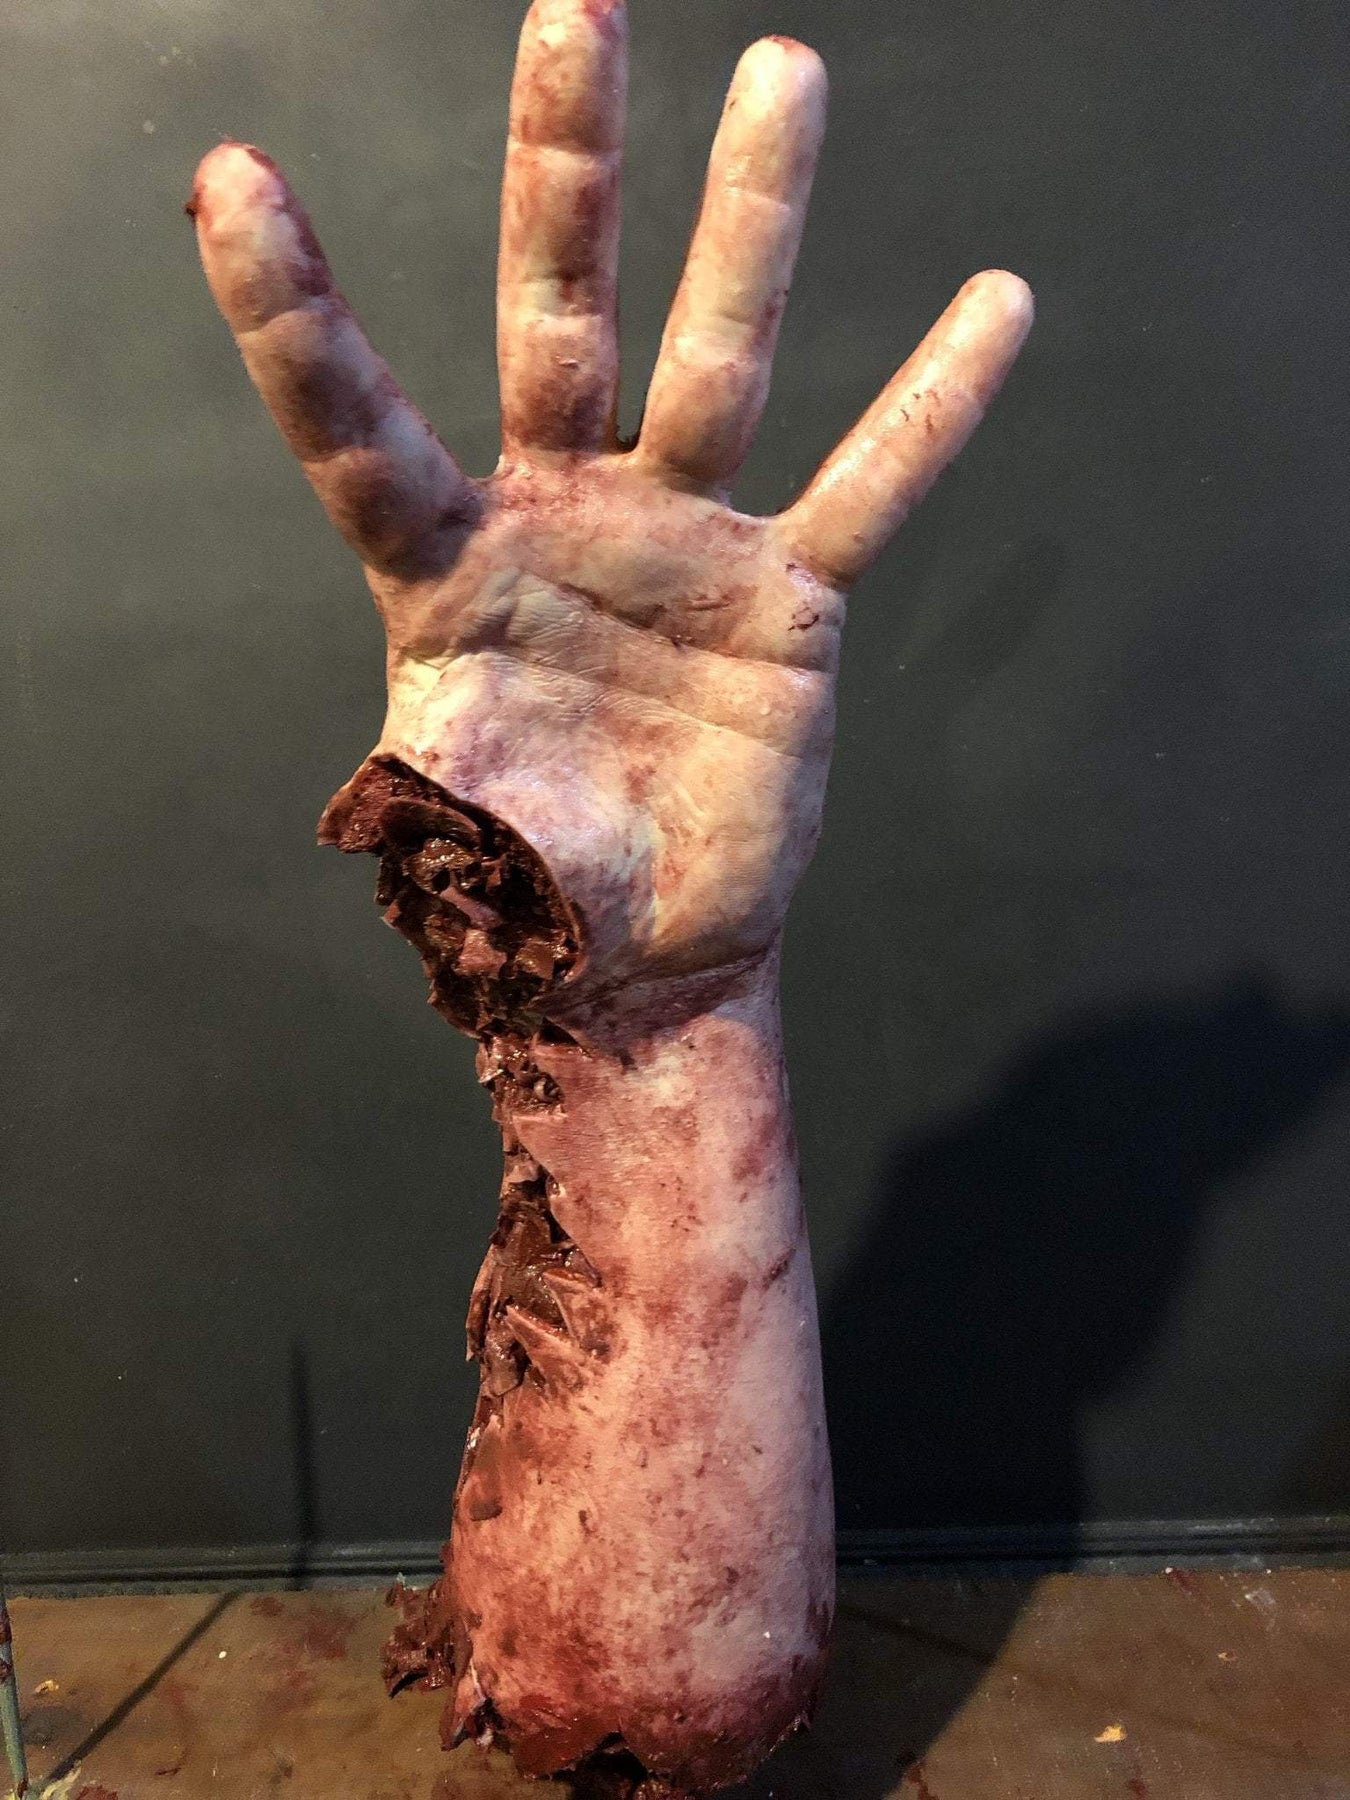 Halloween Simulation Fake Hand with Cloth Arm Realistic Bloody